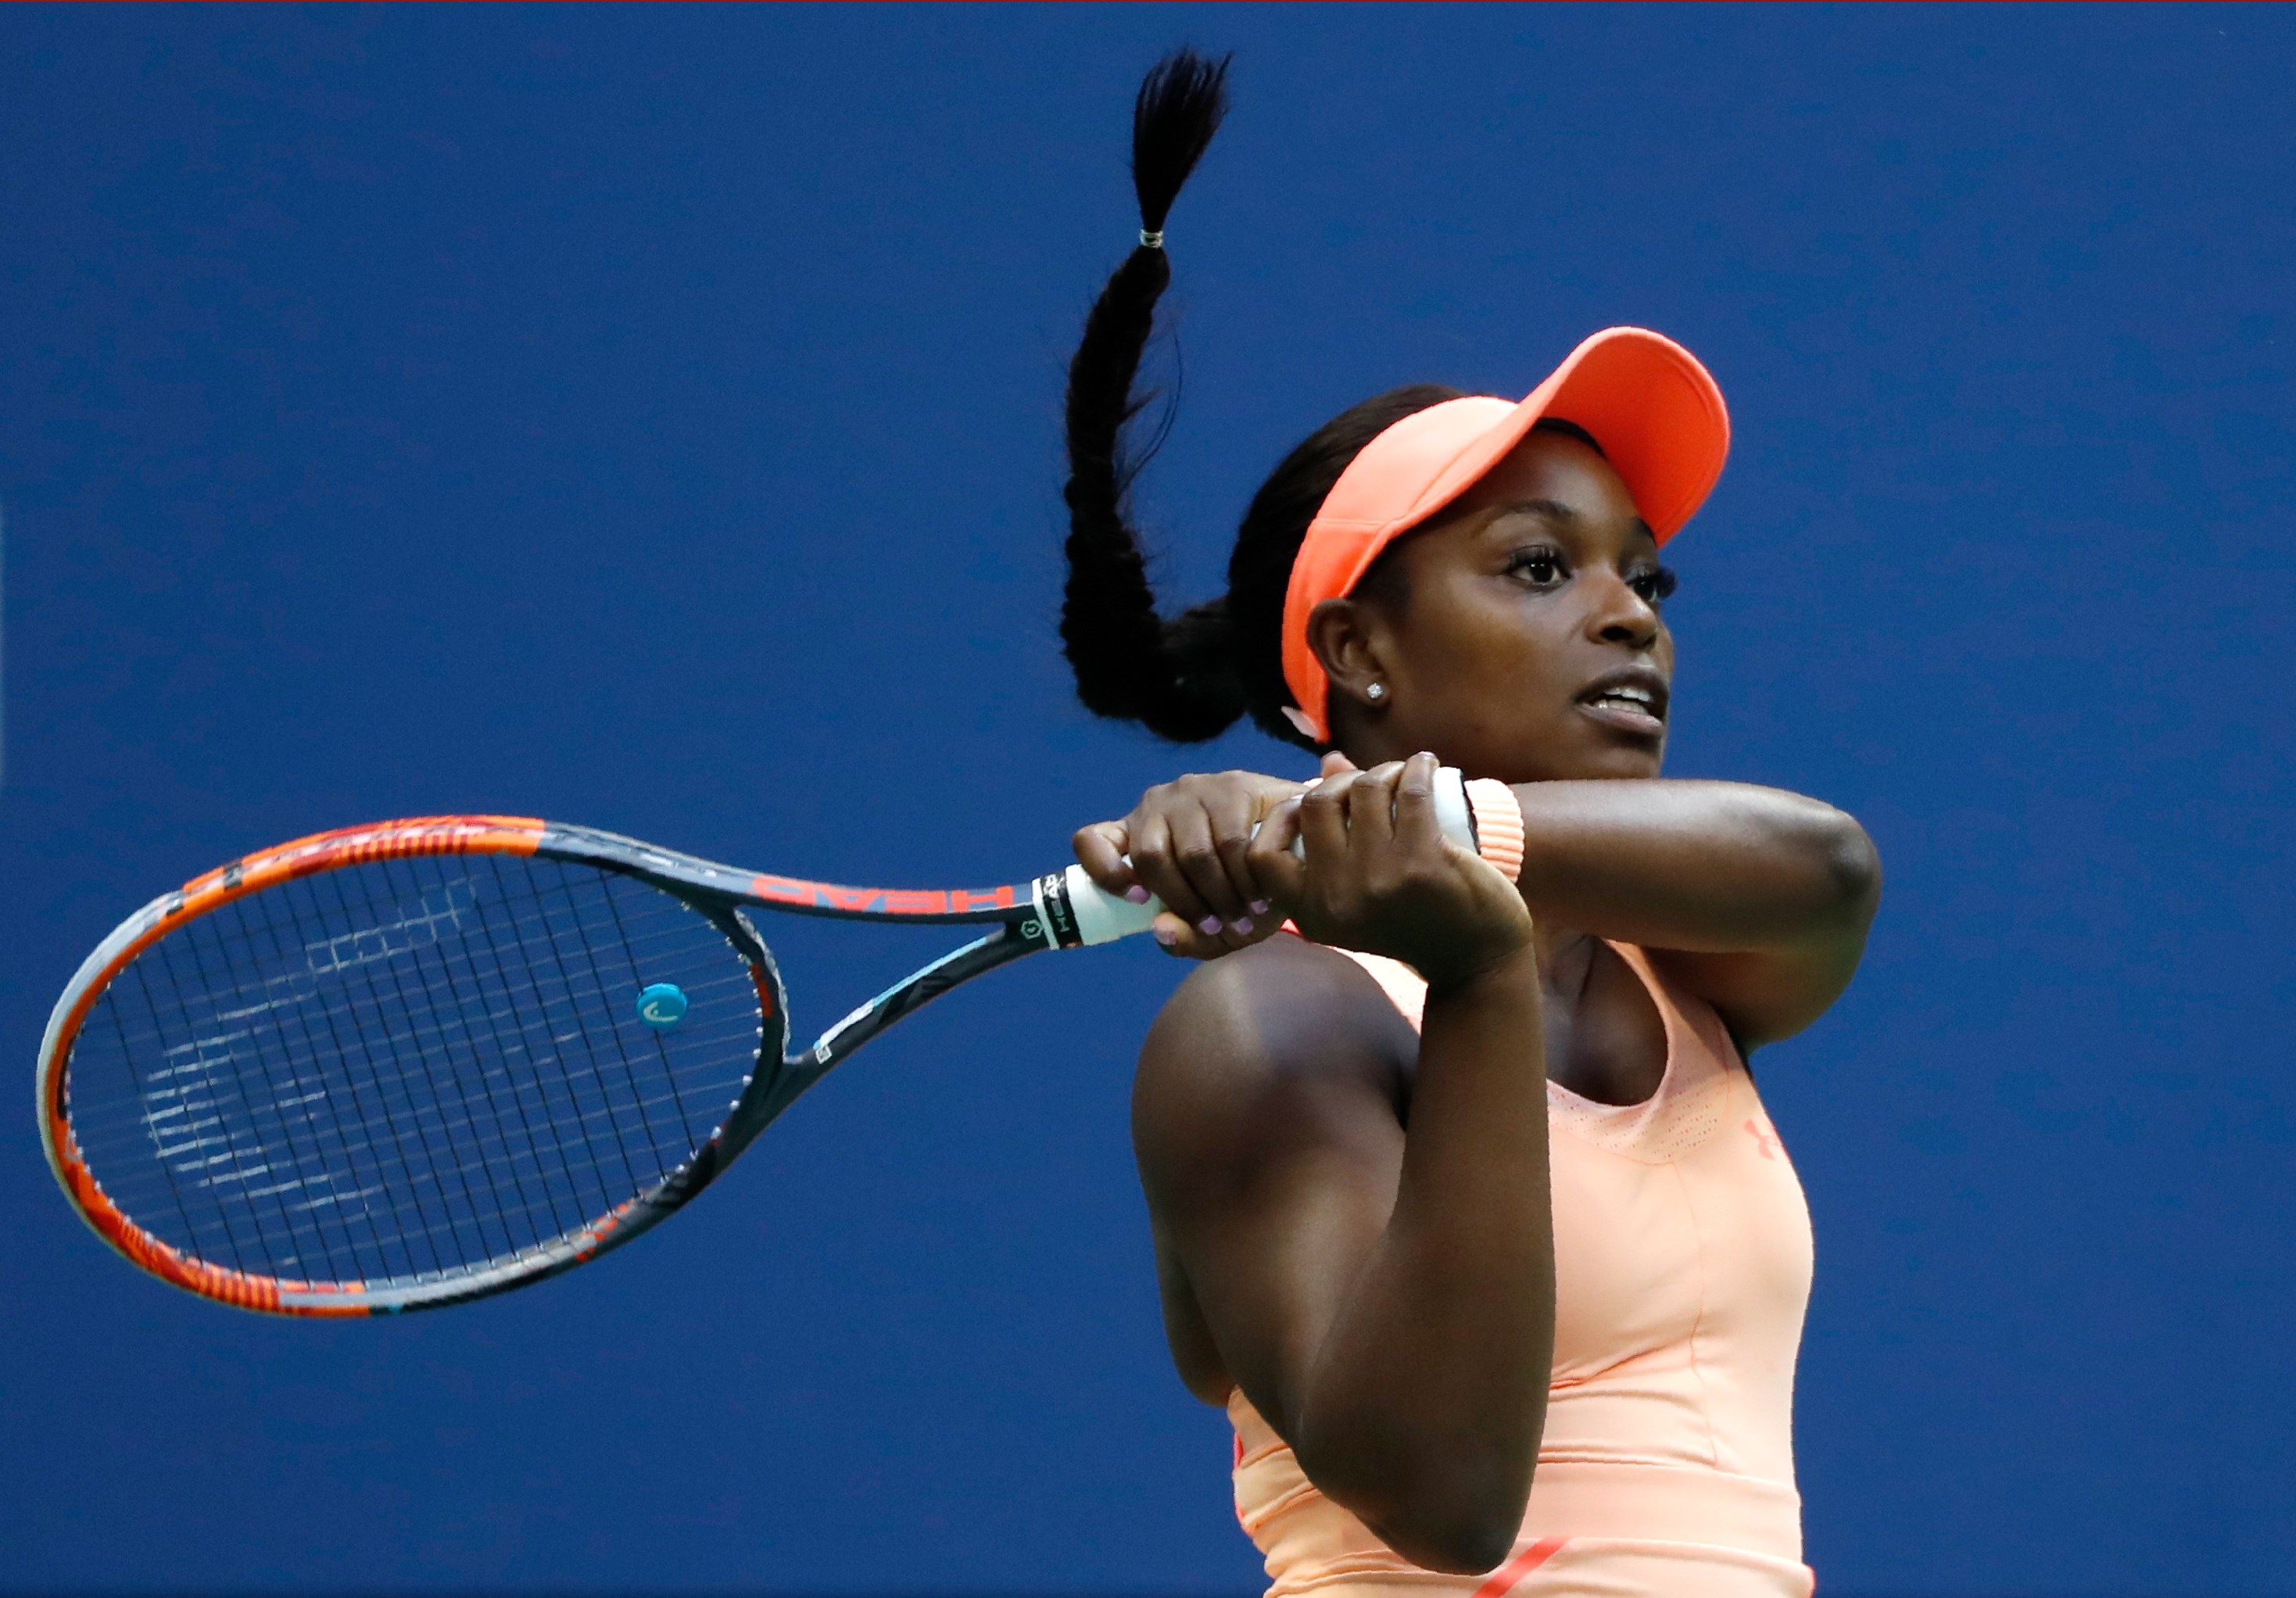 Tennis: Sloane Stephens to win more Slams - if she wants it, says Mats Wilander